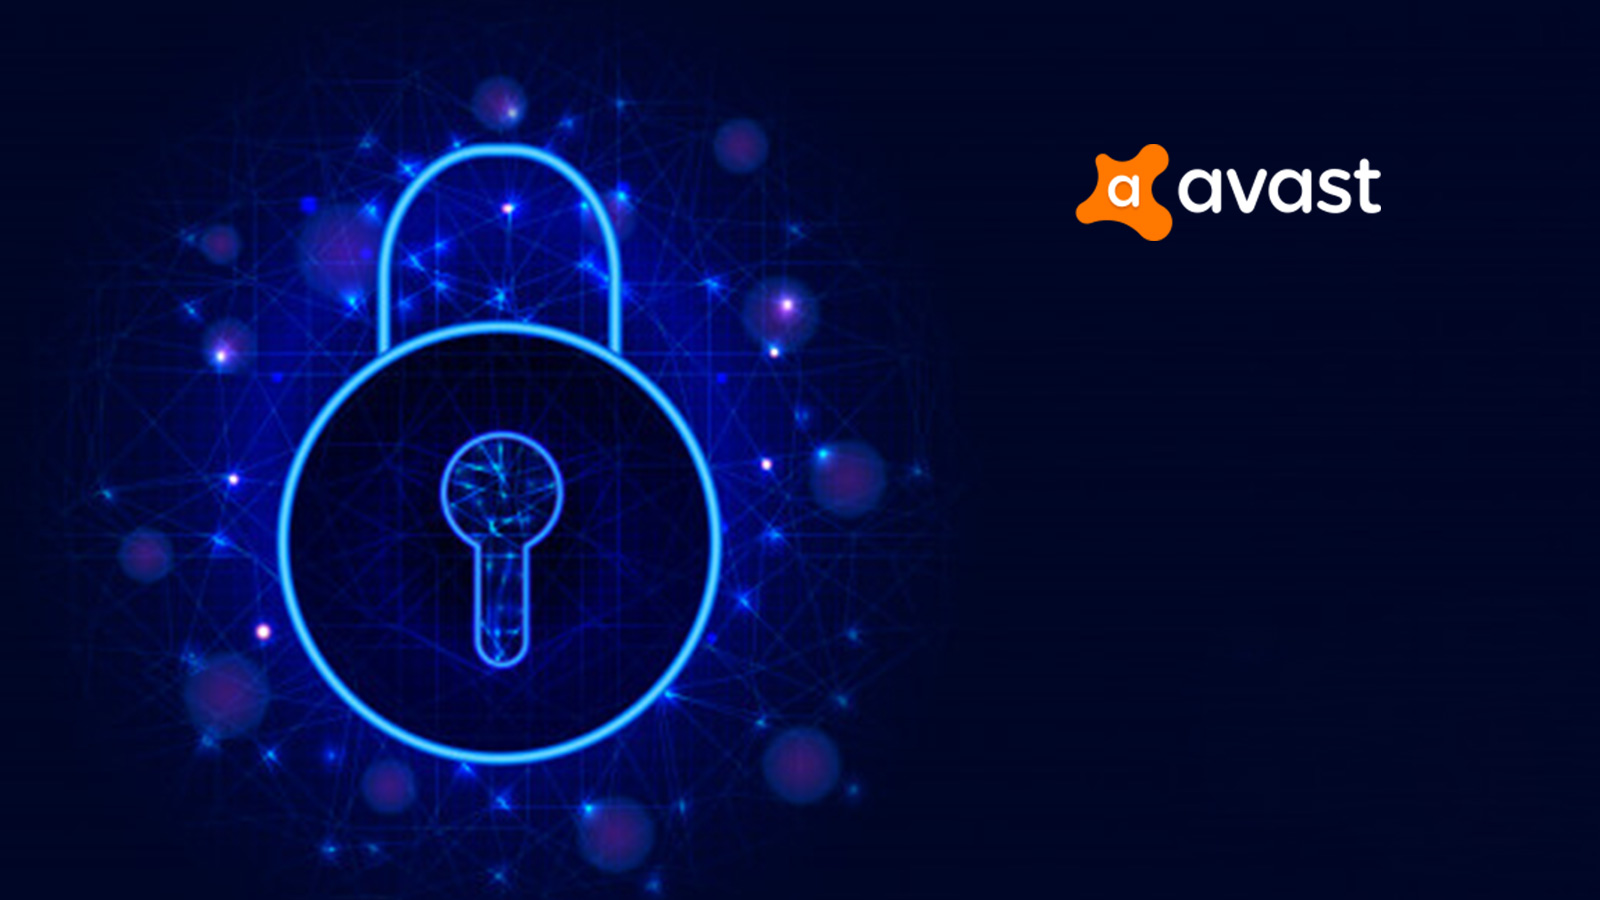 Avast Wallpapers  Wallpaper Cave